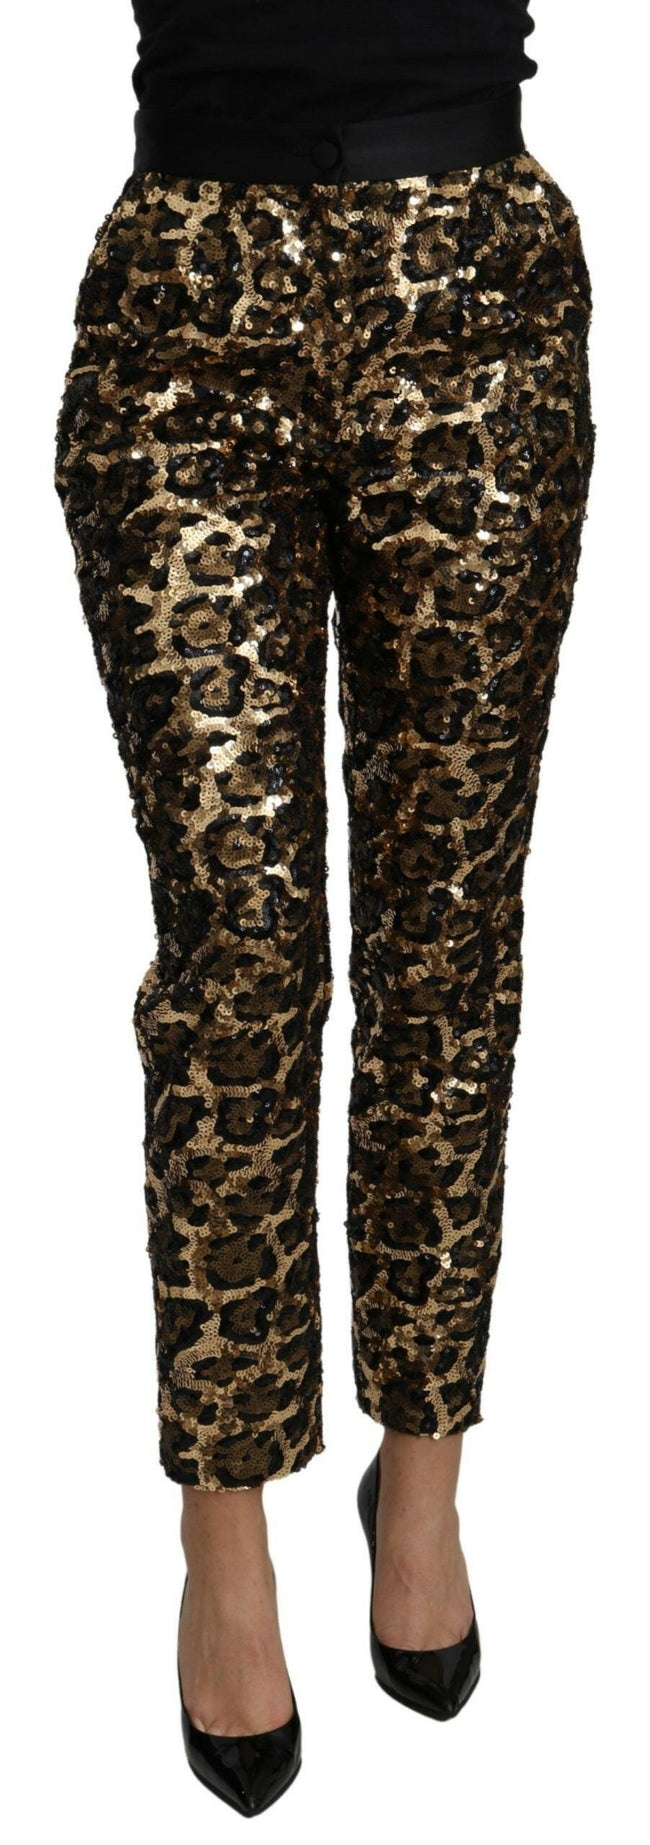 Dolce & Gabbana Gold Brown Leopard Sequined High Waist Pants - GENUINE AUTHENTIC BRAND LLC  